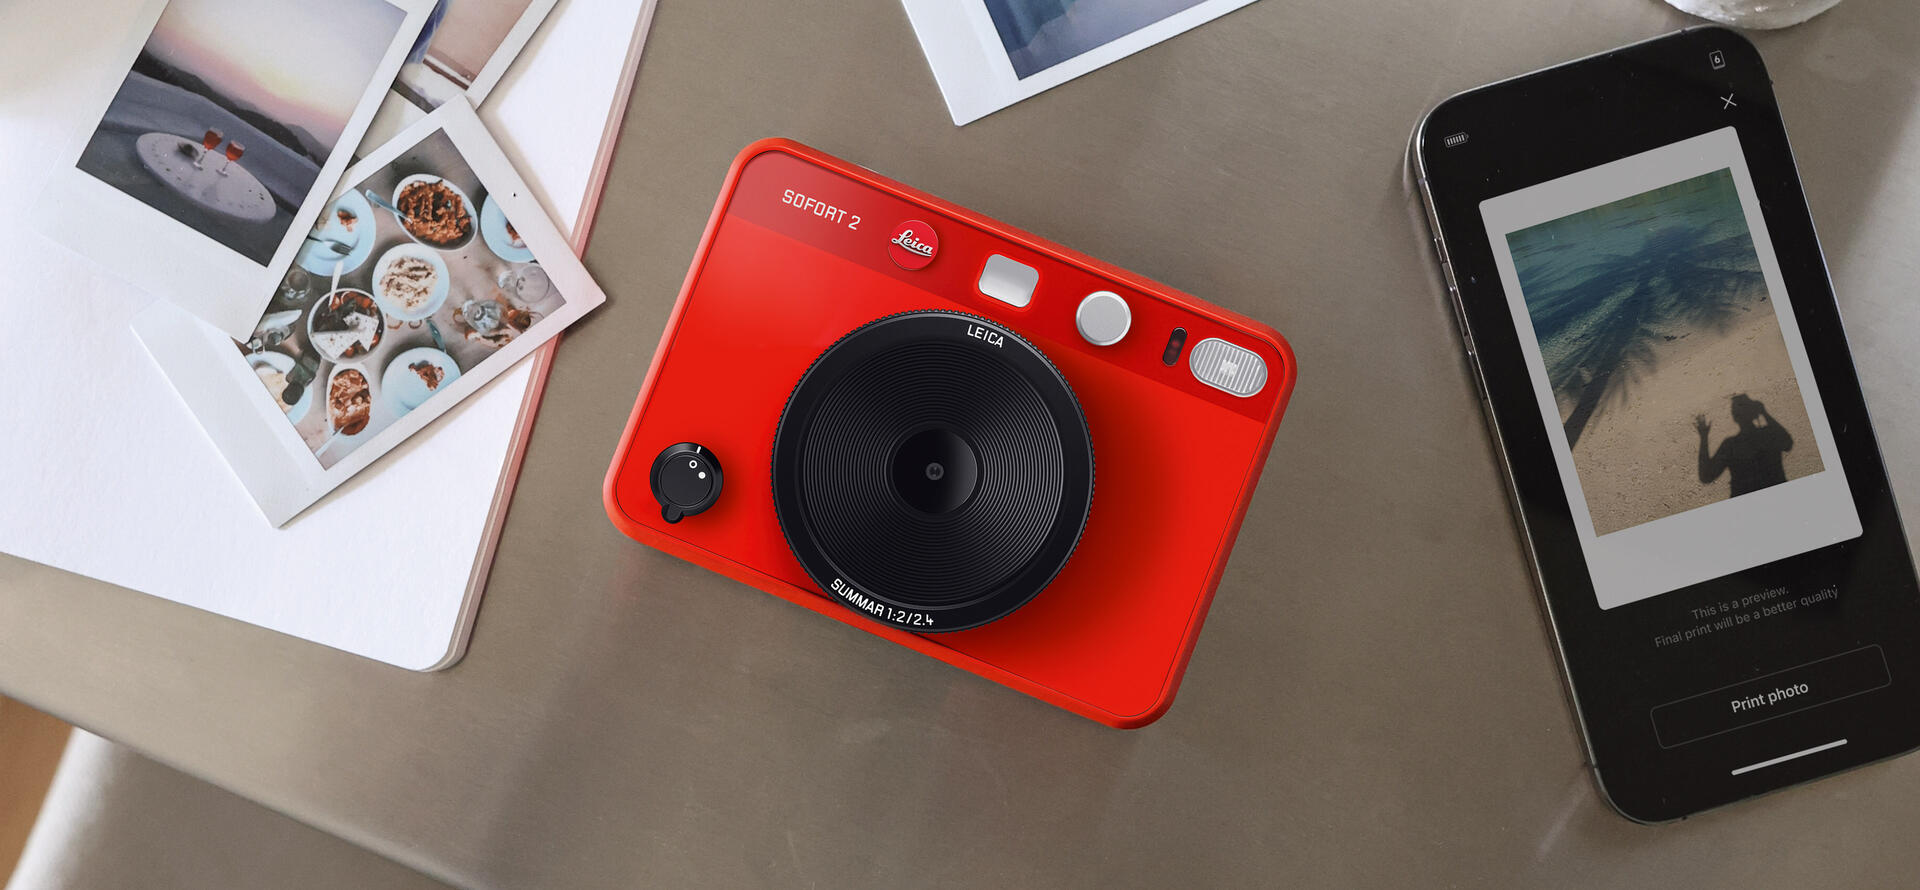 Leica Sofort 2 red in the middle of prints and a mobile phone.